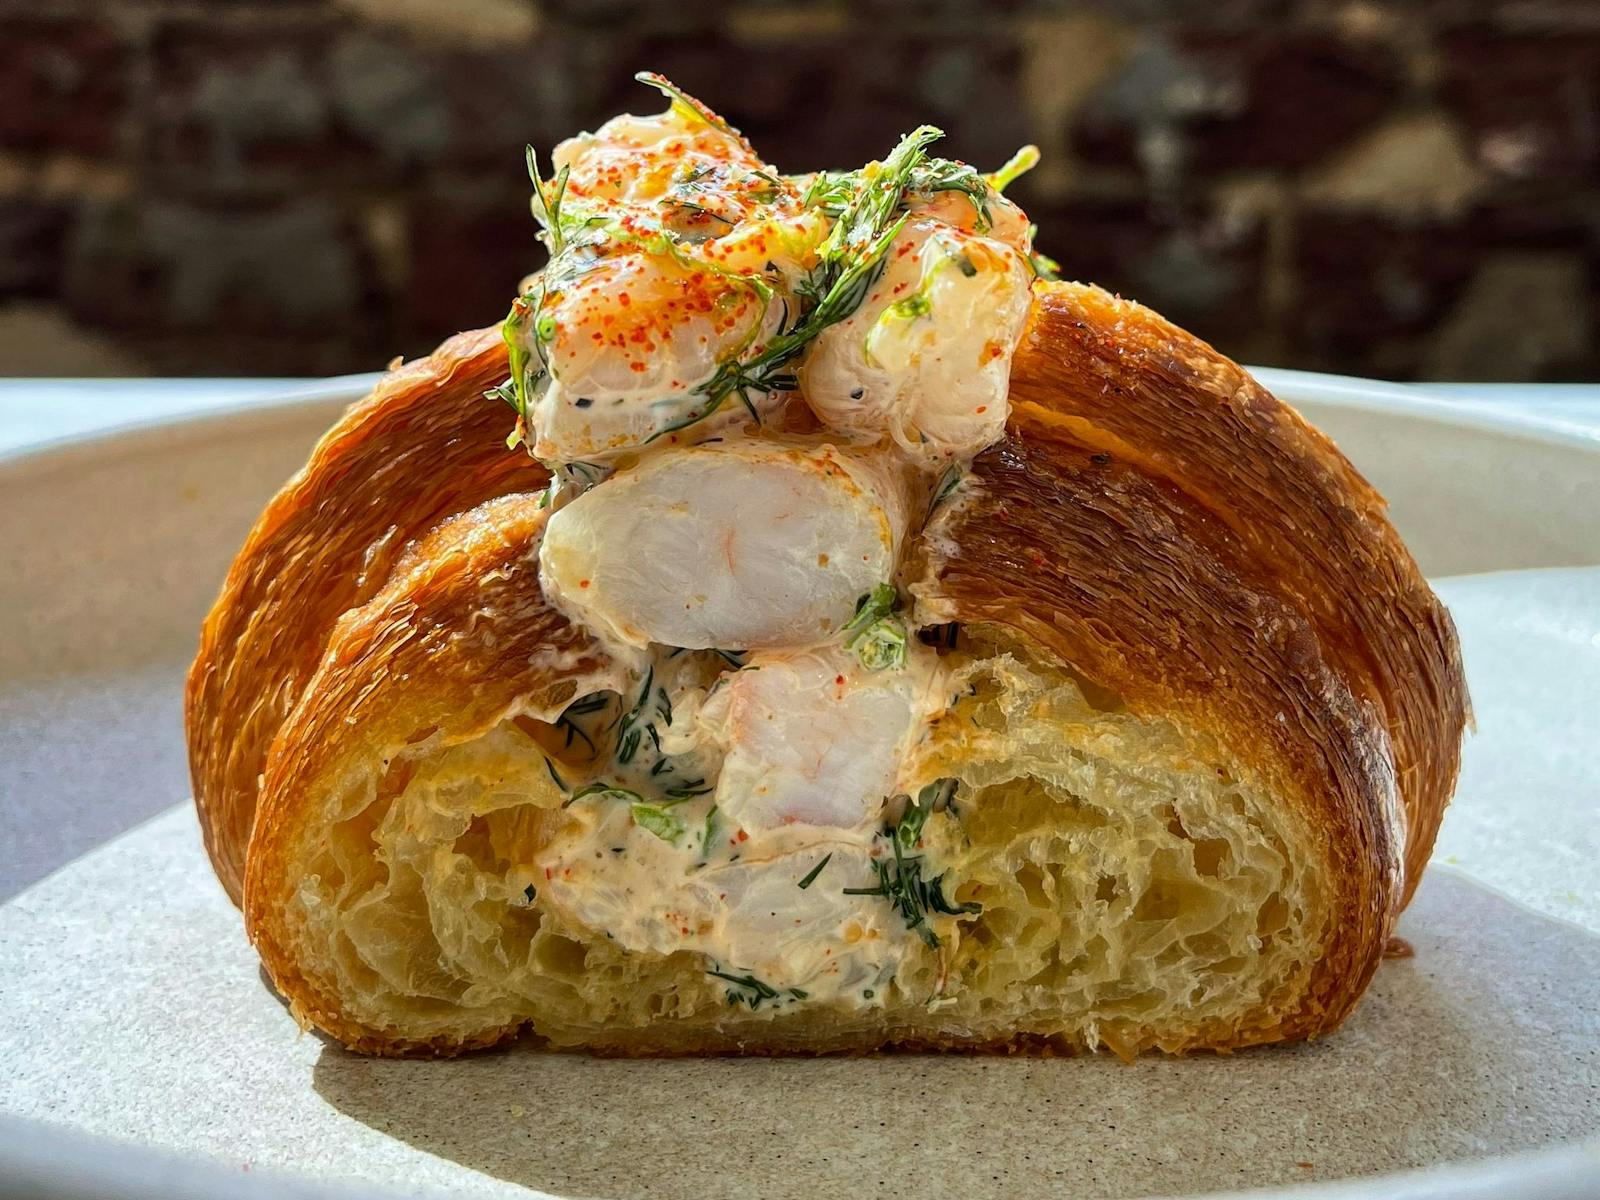 Locally made fresh croissant, filled with locally caught prawns.